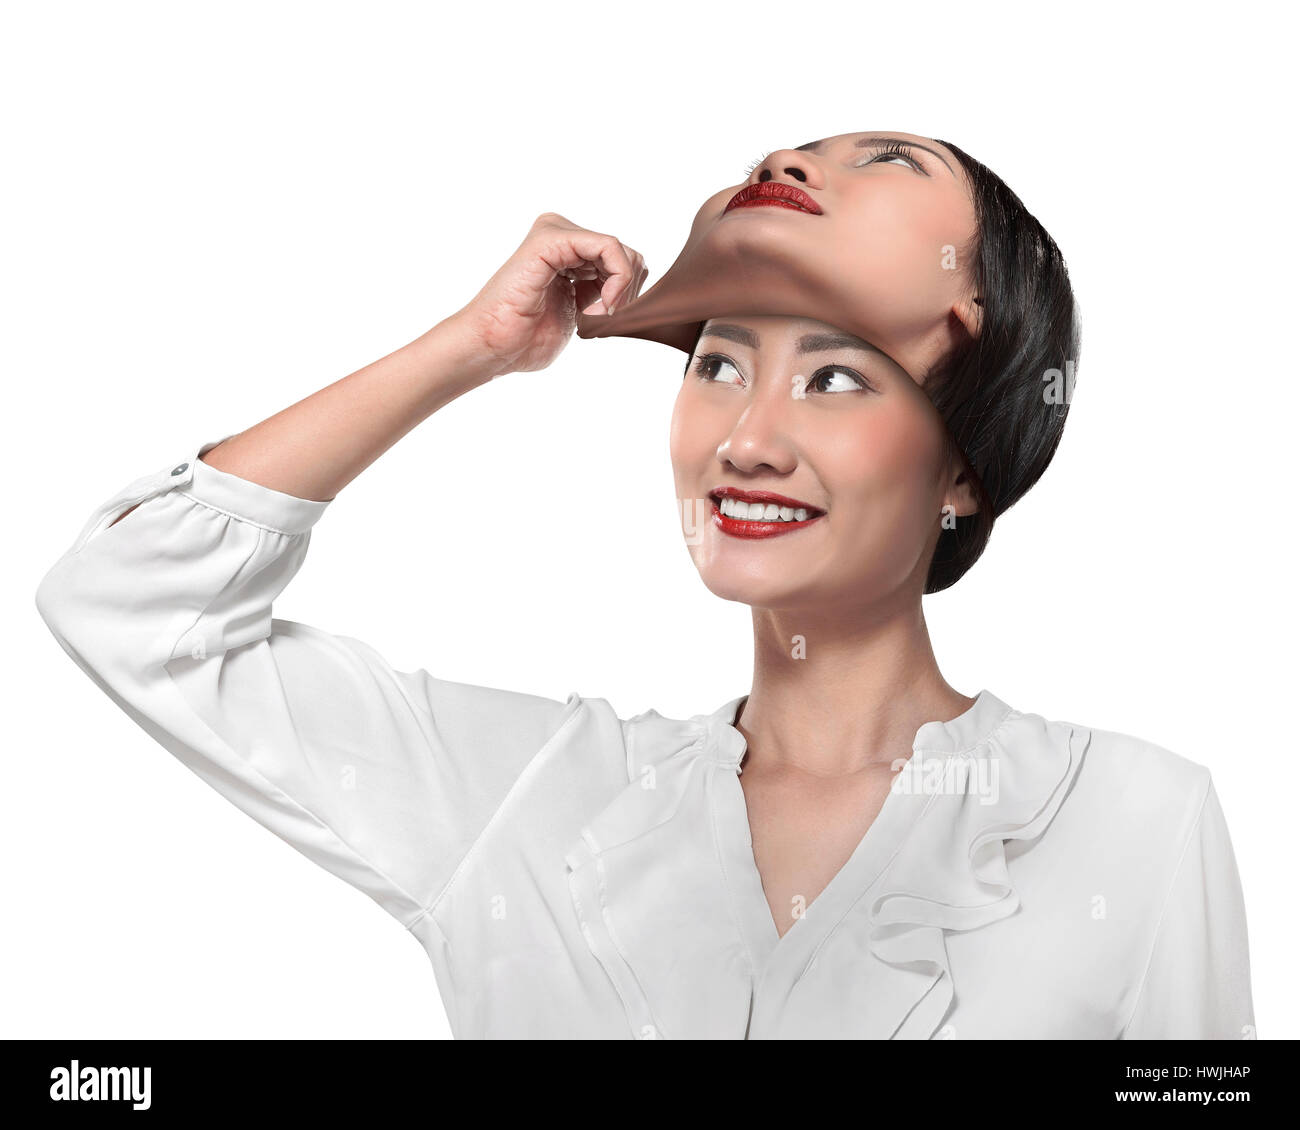 https://c8.alamy.com/comp/HWJHAP/asian-business-woman-remove-his-other-face-mask-changing-mood-concept-HWJHAP.jpg